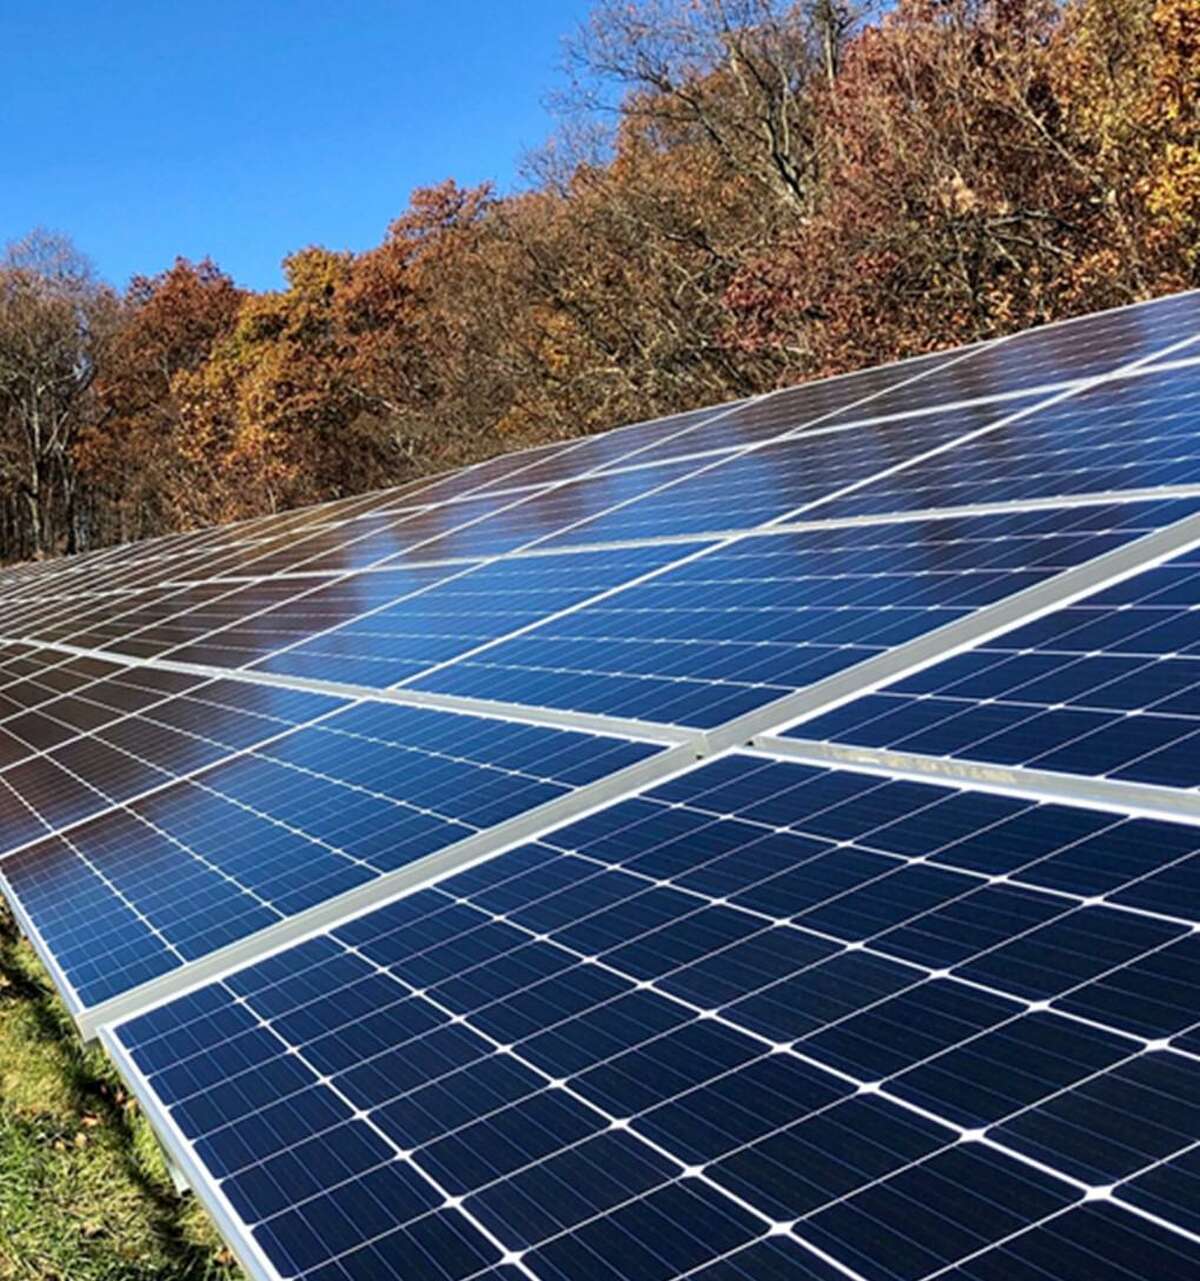 Verogy, a solar energy company, is applying to install a solar panel array on property on East Pearl Road in Torrington.